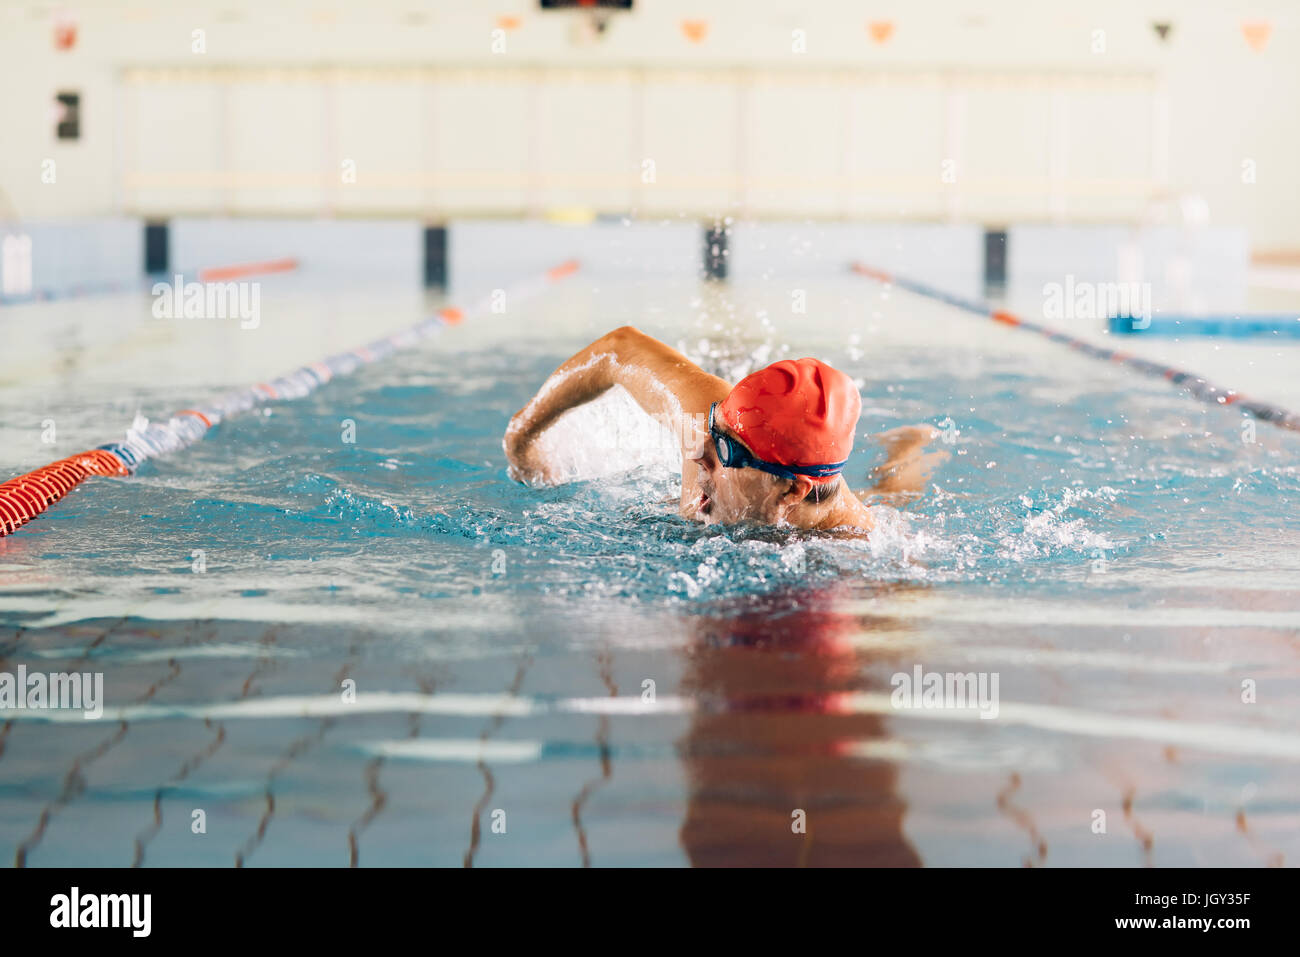 Senior man swimming in pool Banque D'Images